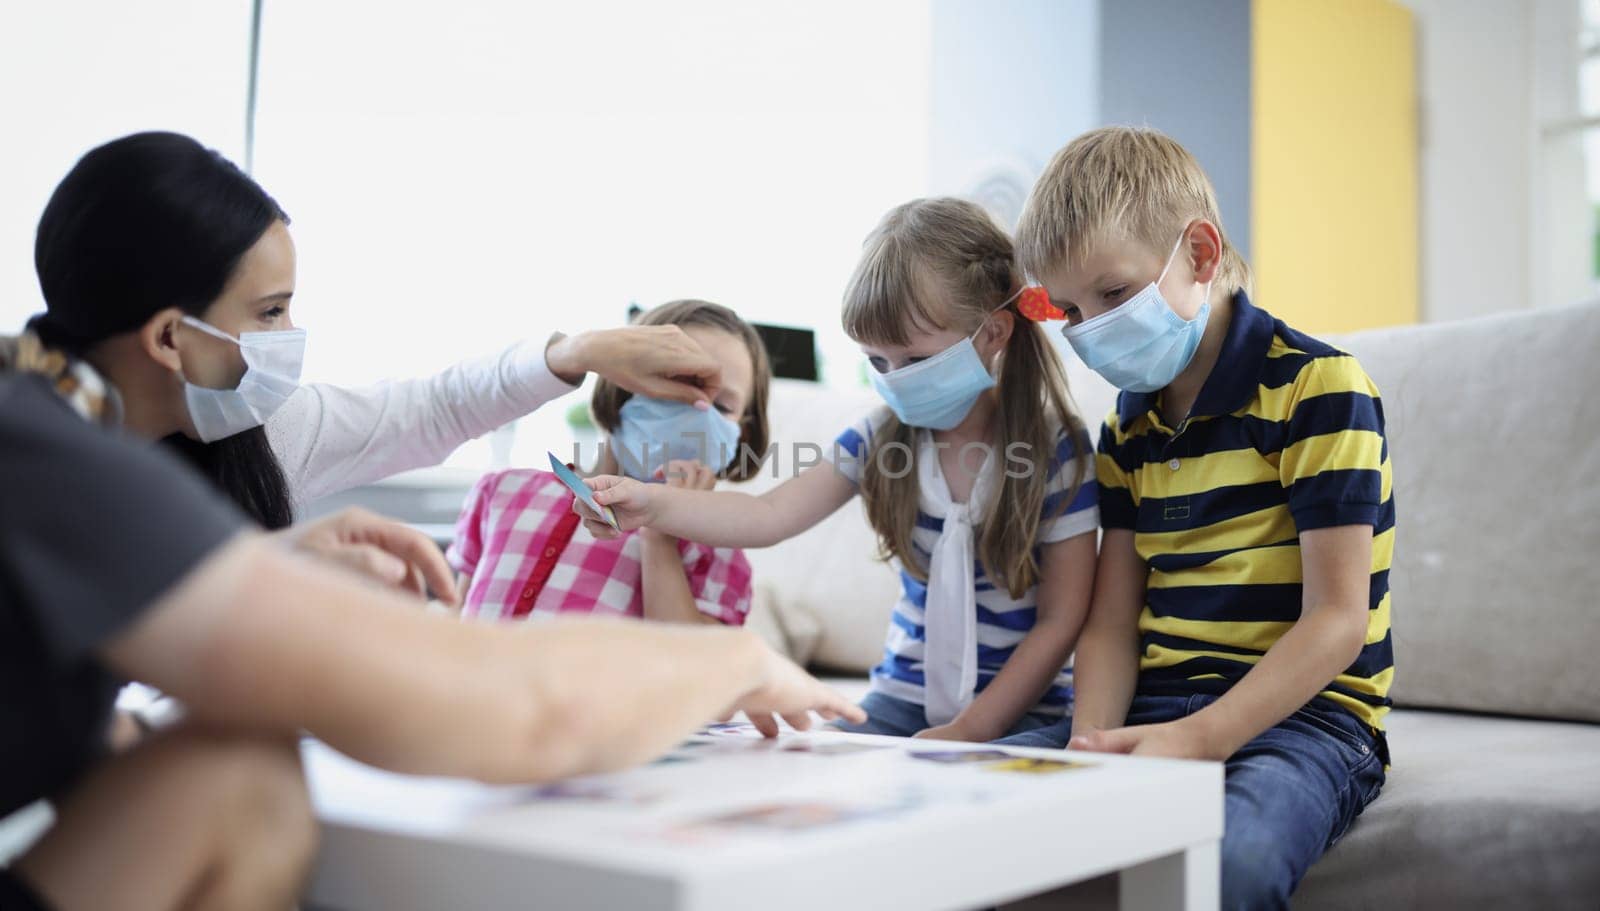 Woman keep checking on kids health, ask to wear face mask, prevent covid spread by kuprevich